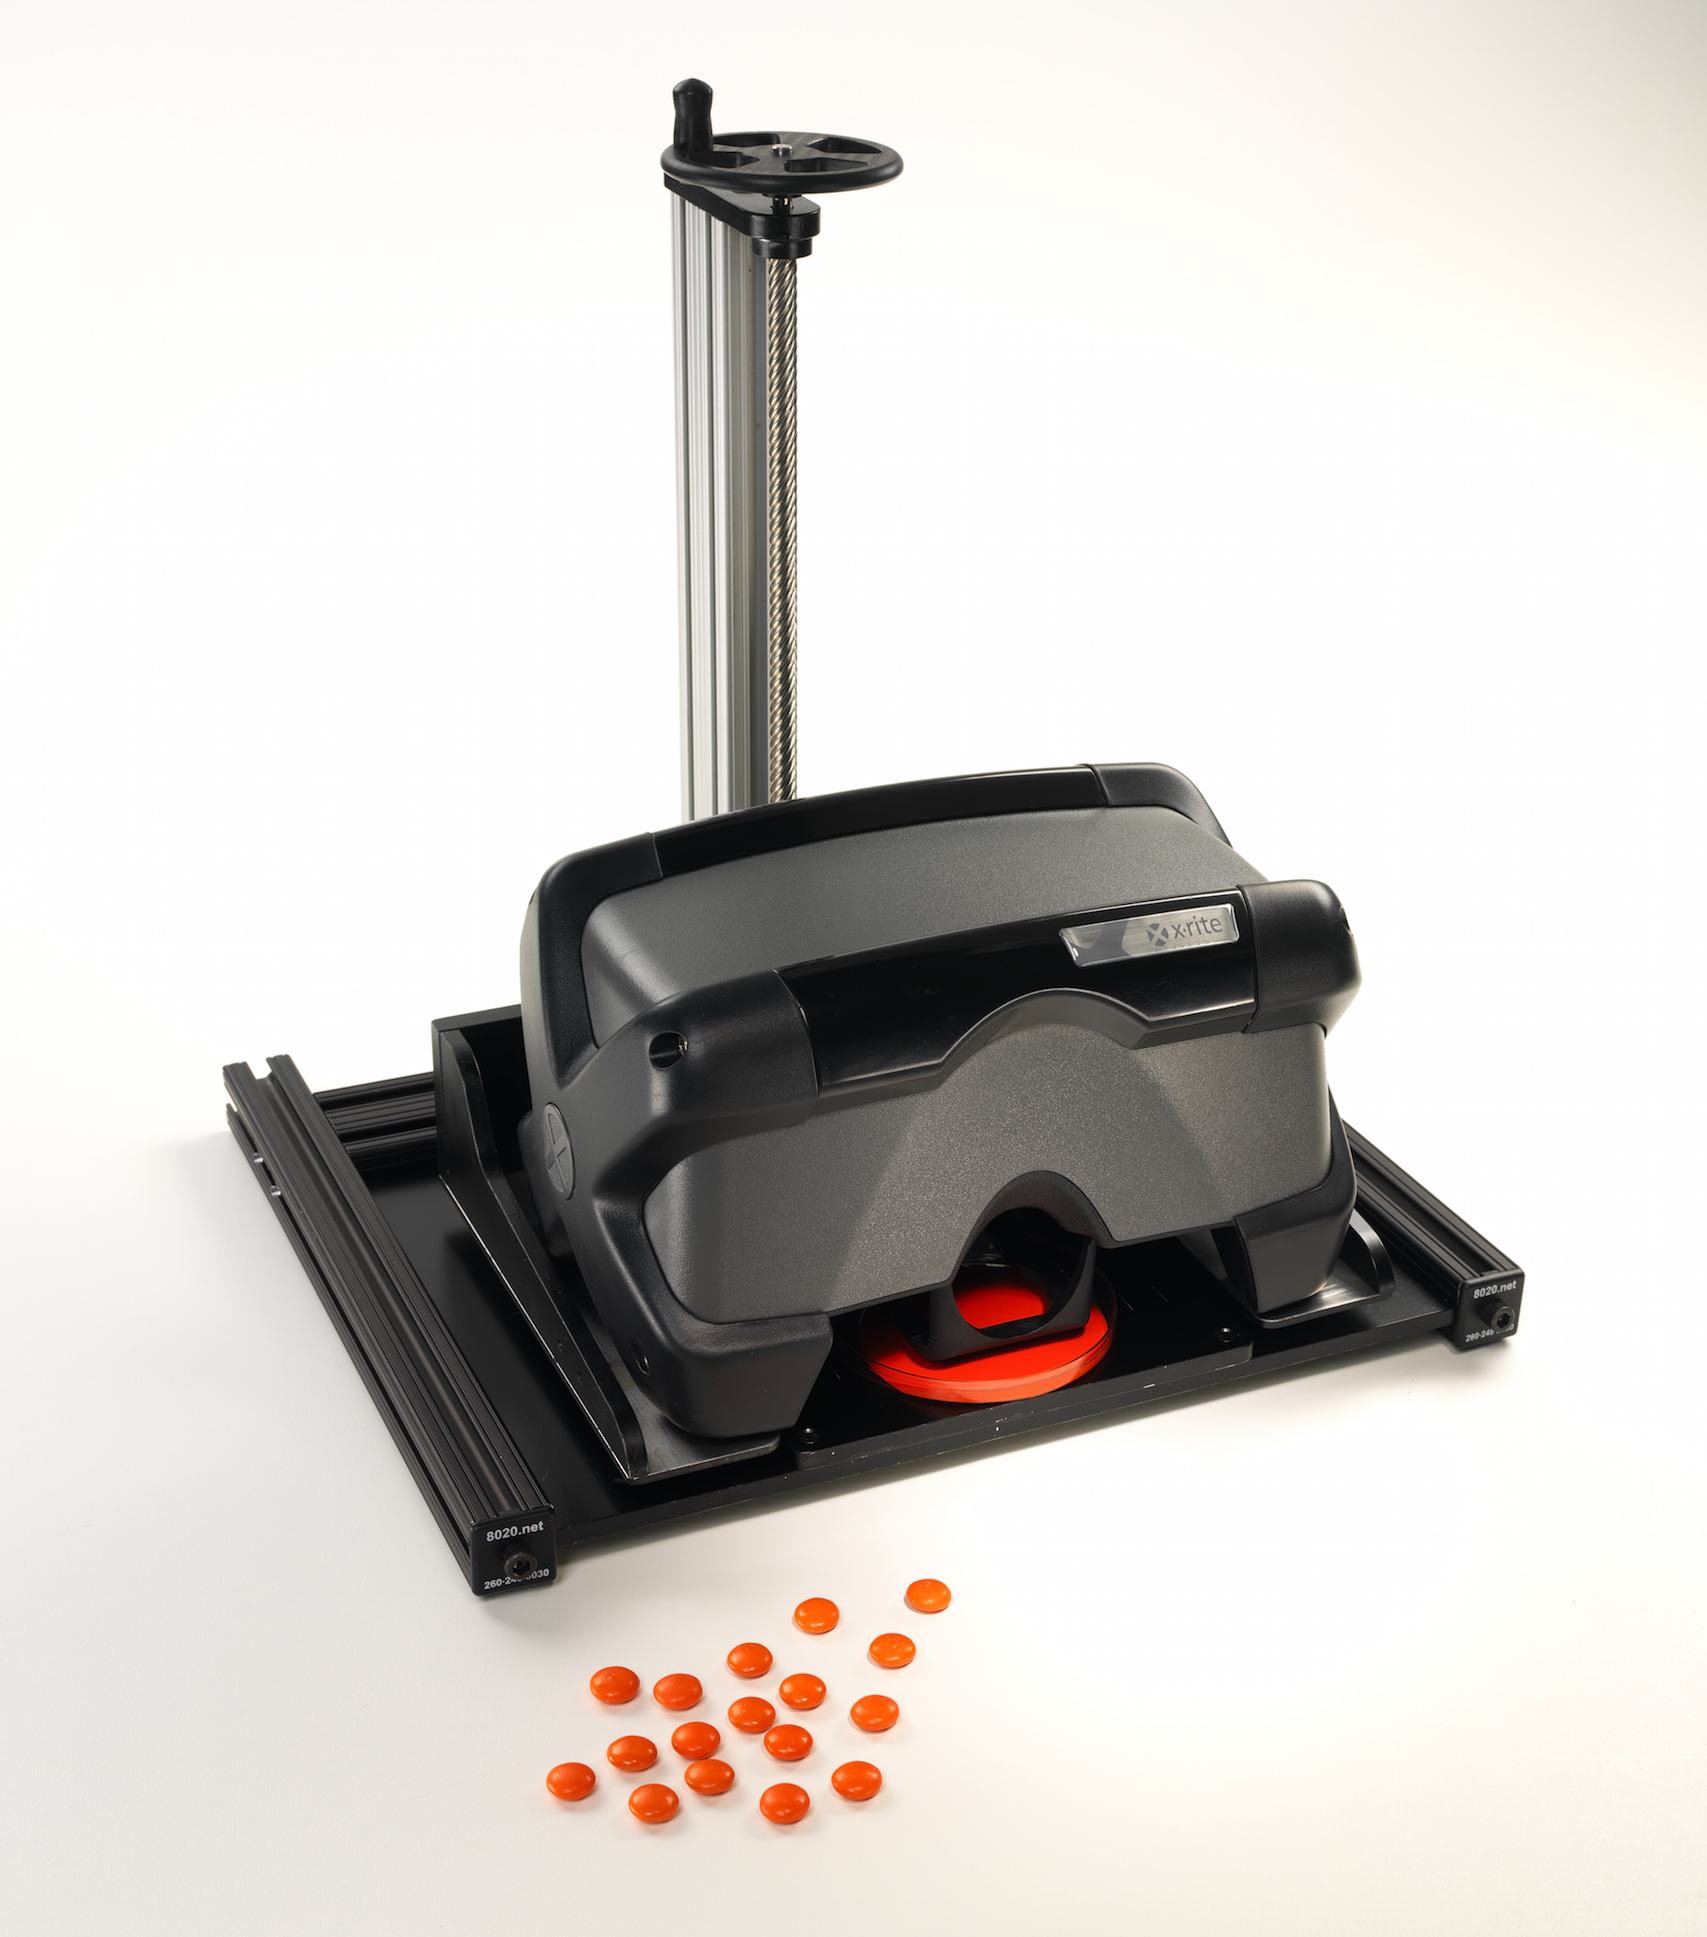 Using the VS450 non-contact spectro with gloss sensor to measure the color of small candies.